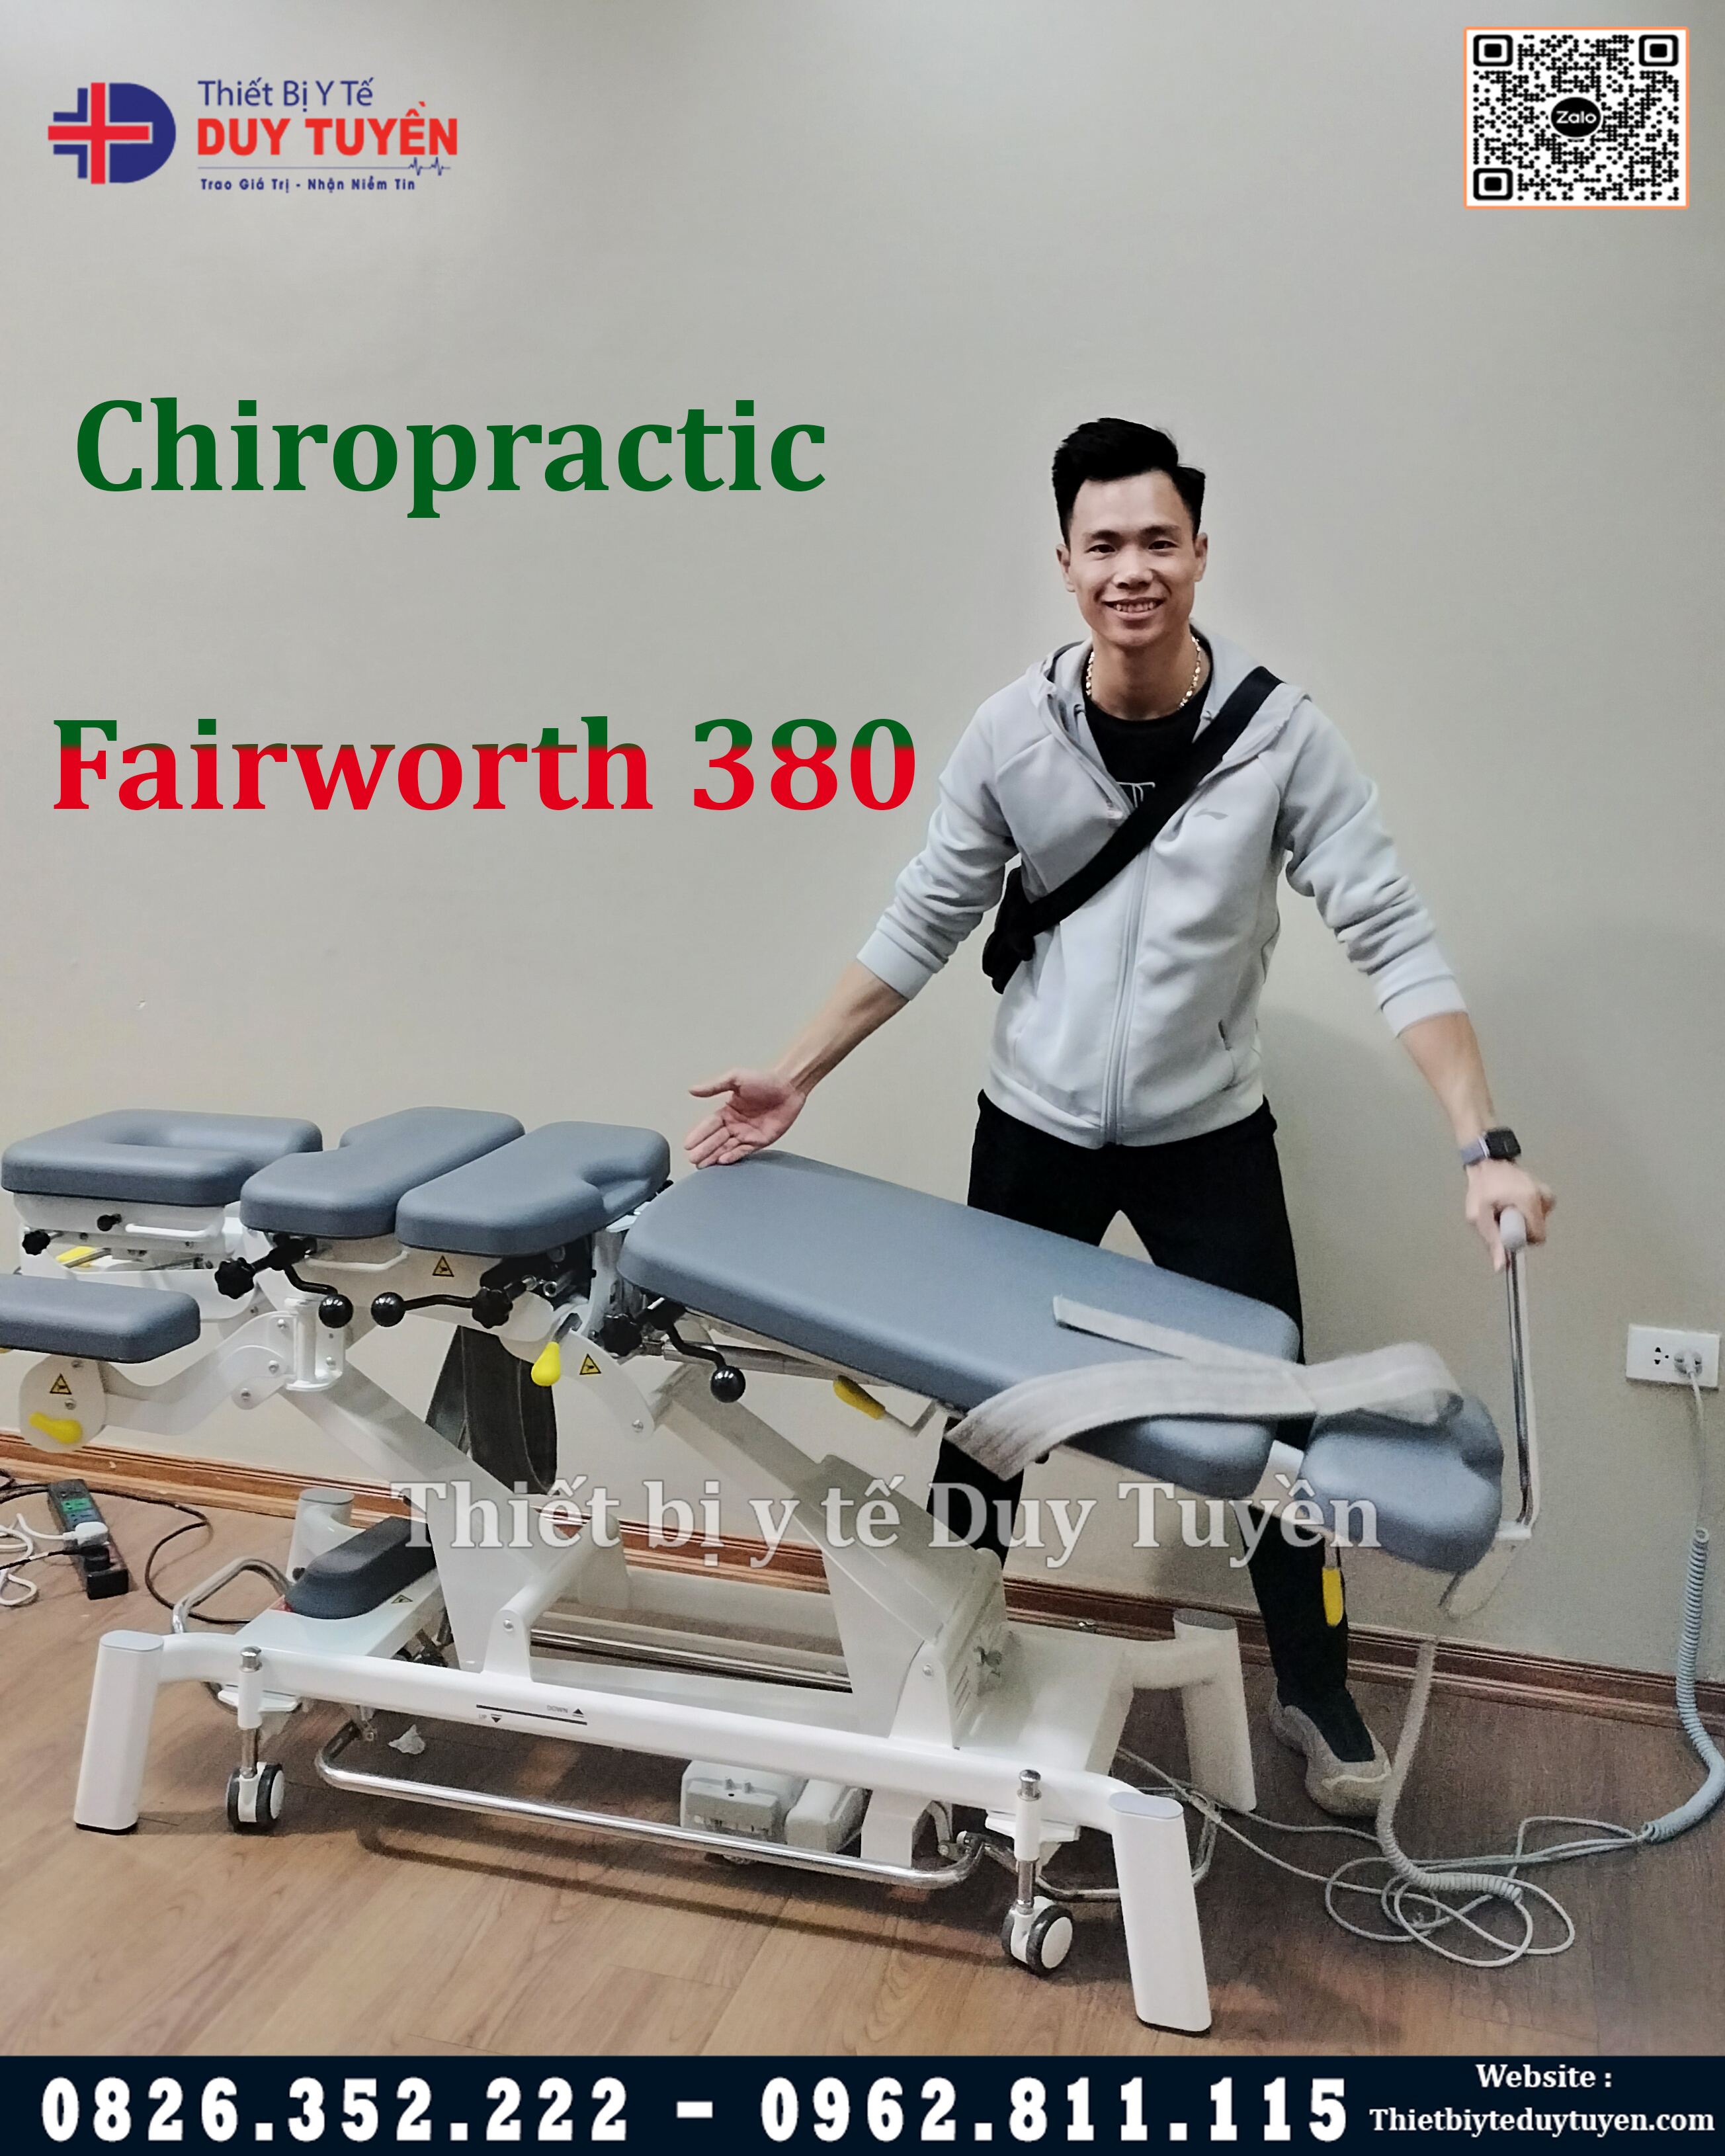 Giao giường chiropractic fairworth 380